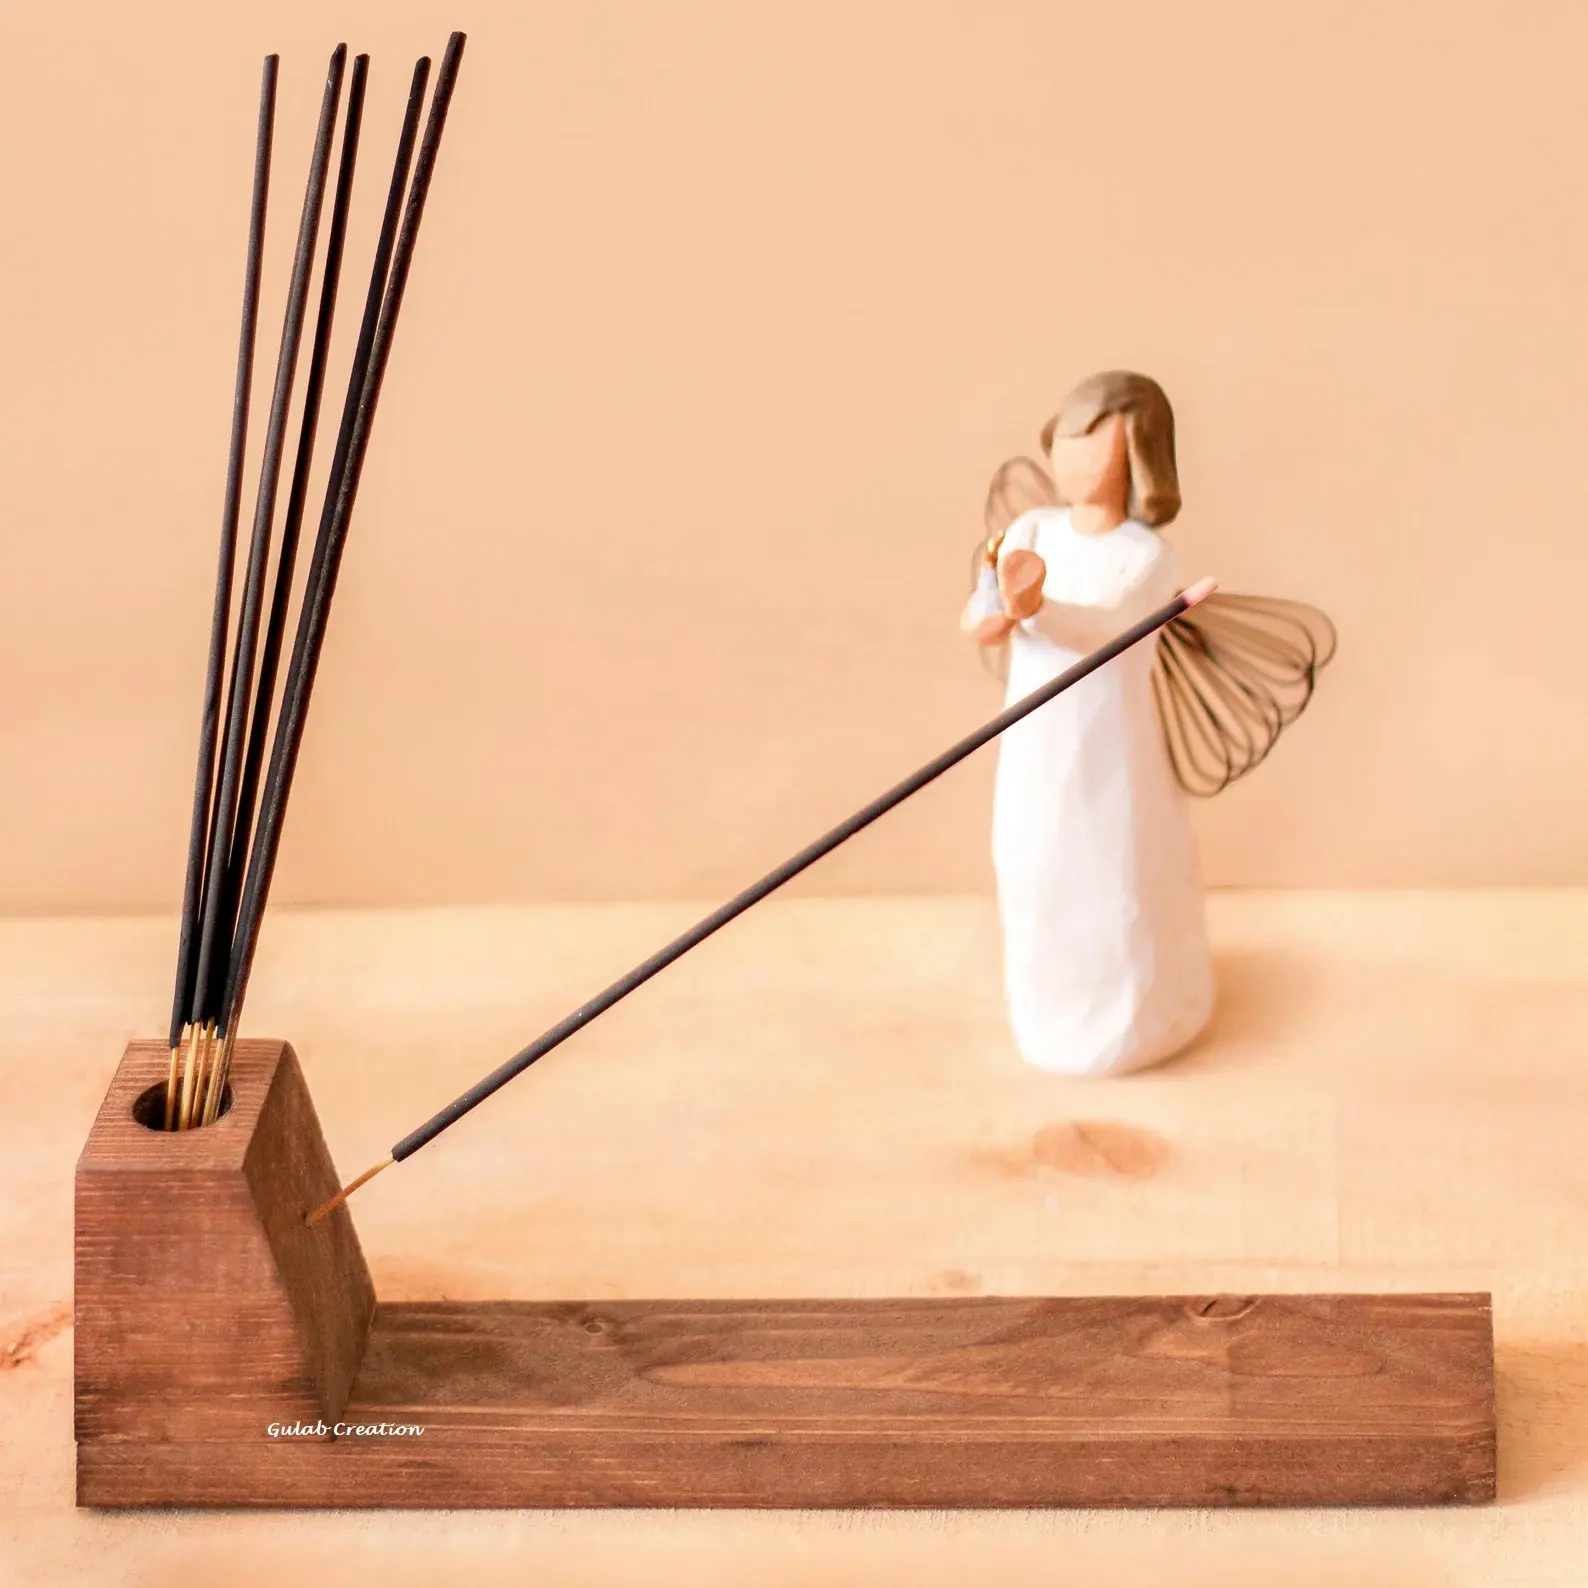 Rustic vintage wooden incense holder made of mango wood for your scented sticks by ZAMZAM IMPEX